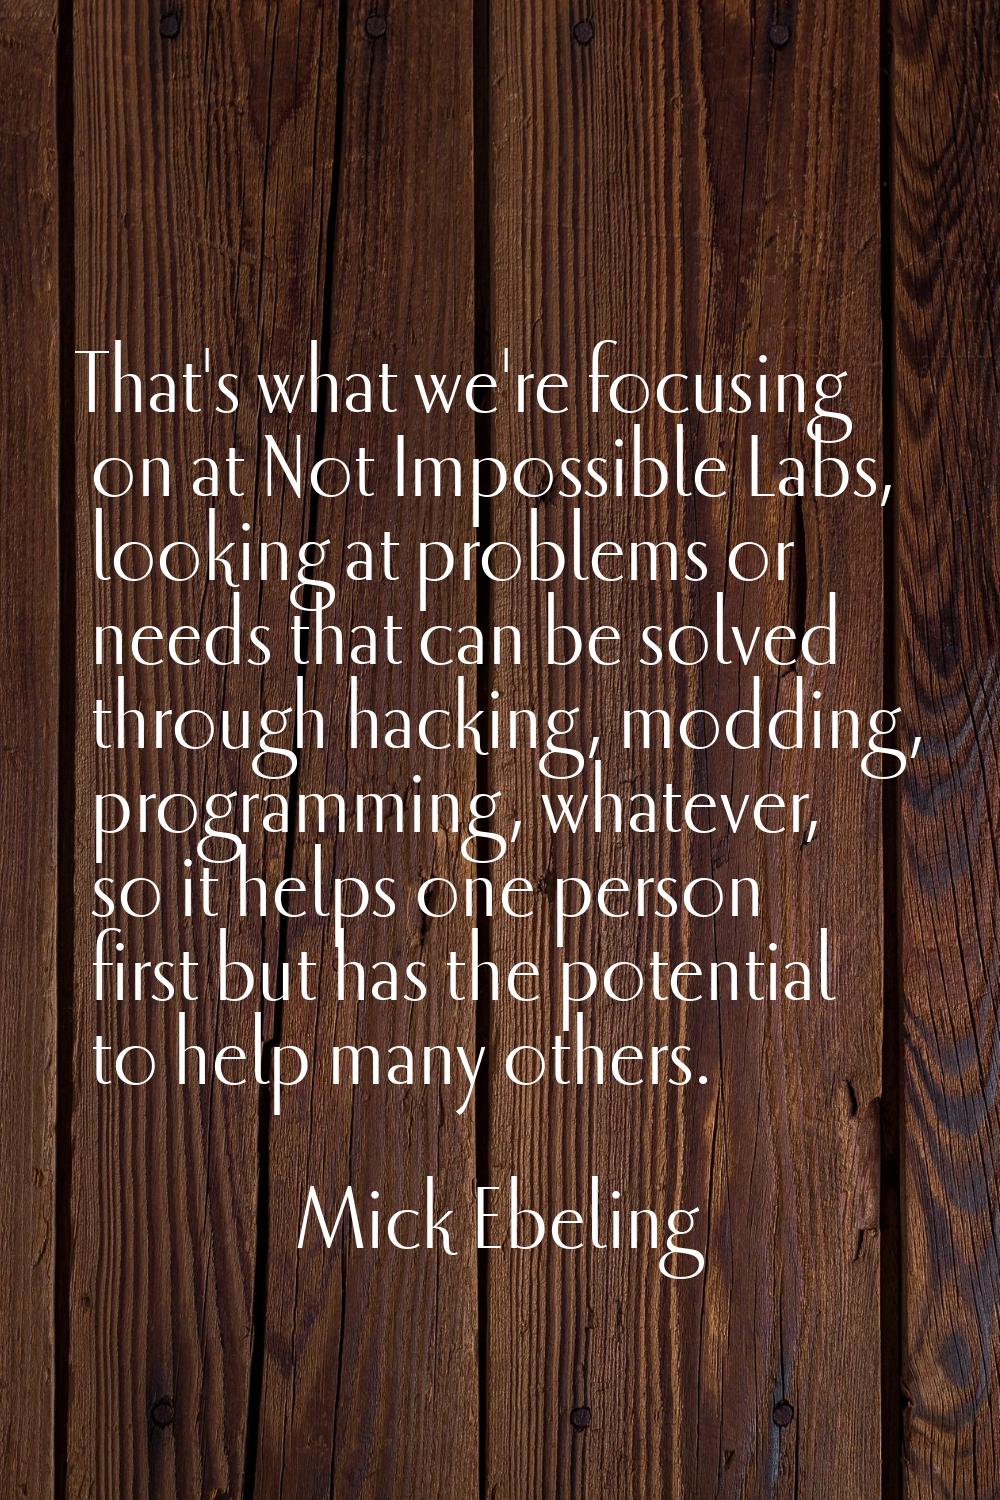 That's what we're focusing on at Not Impossible Labs, looking at problems or needs that can be solv